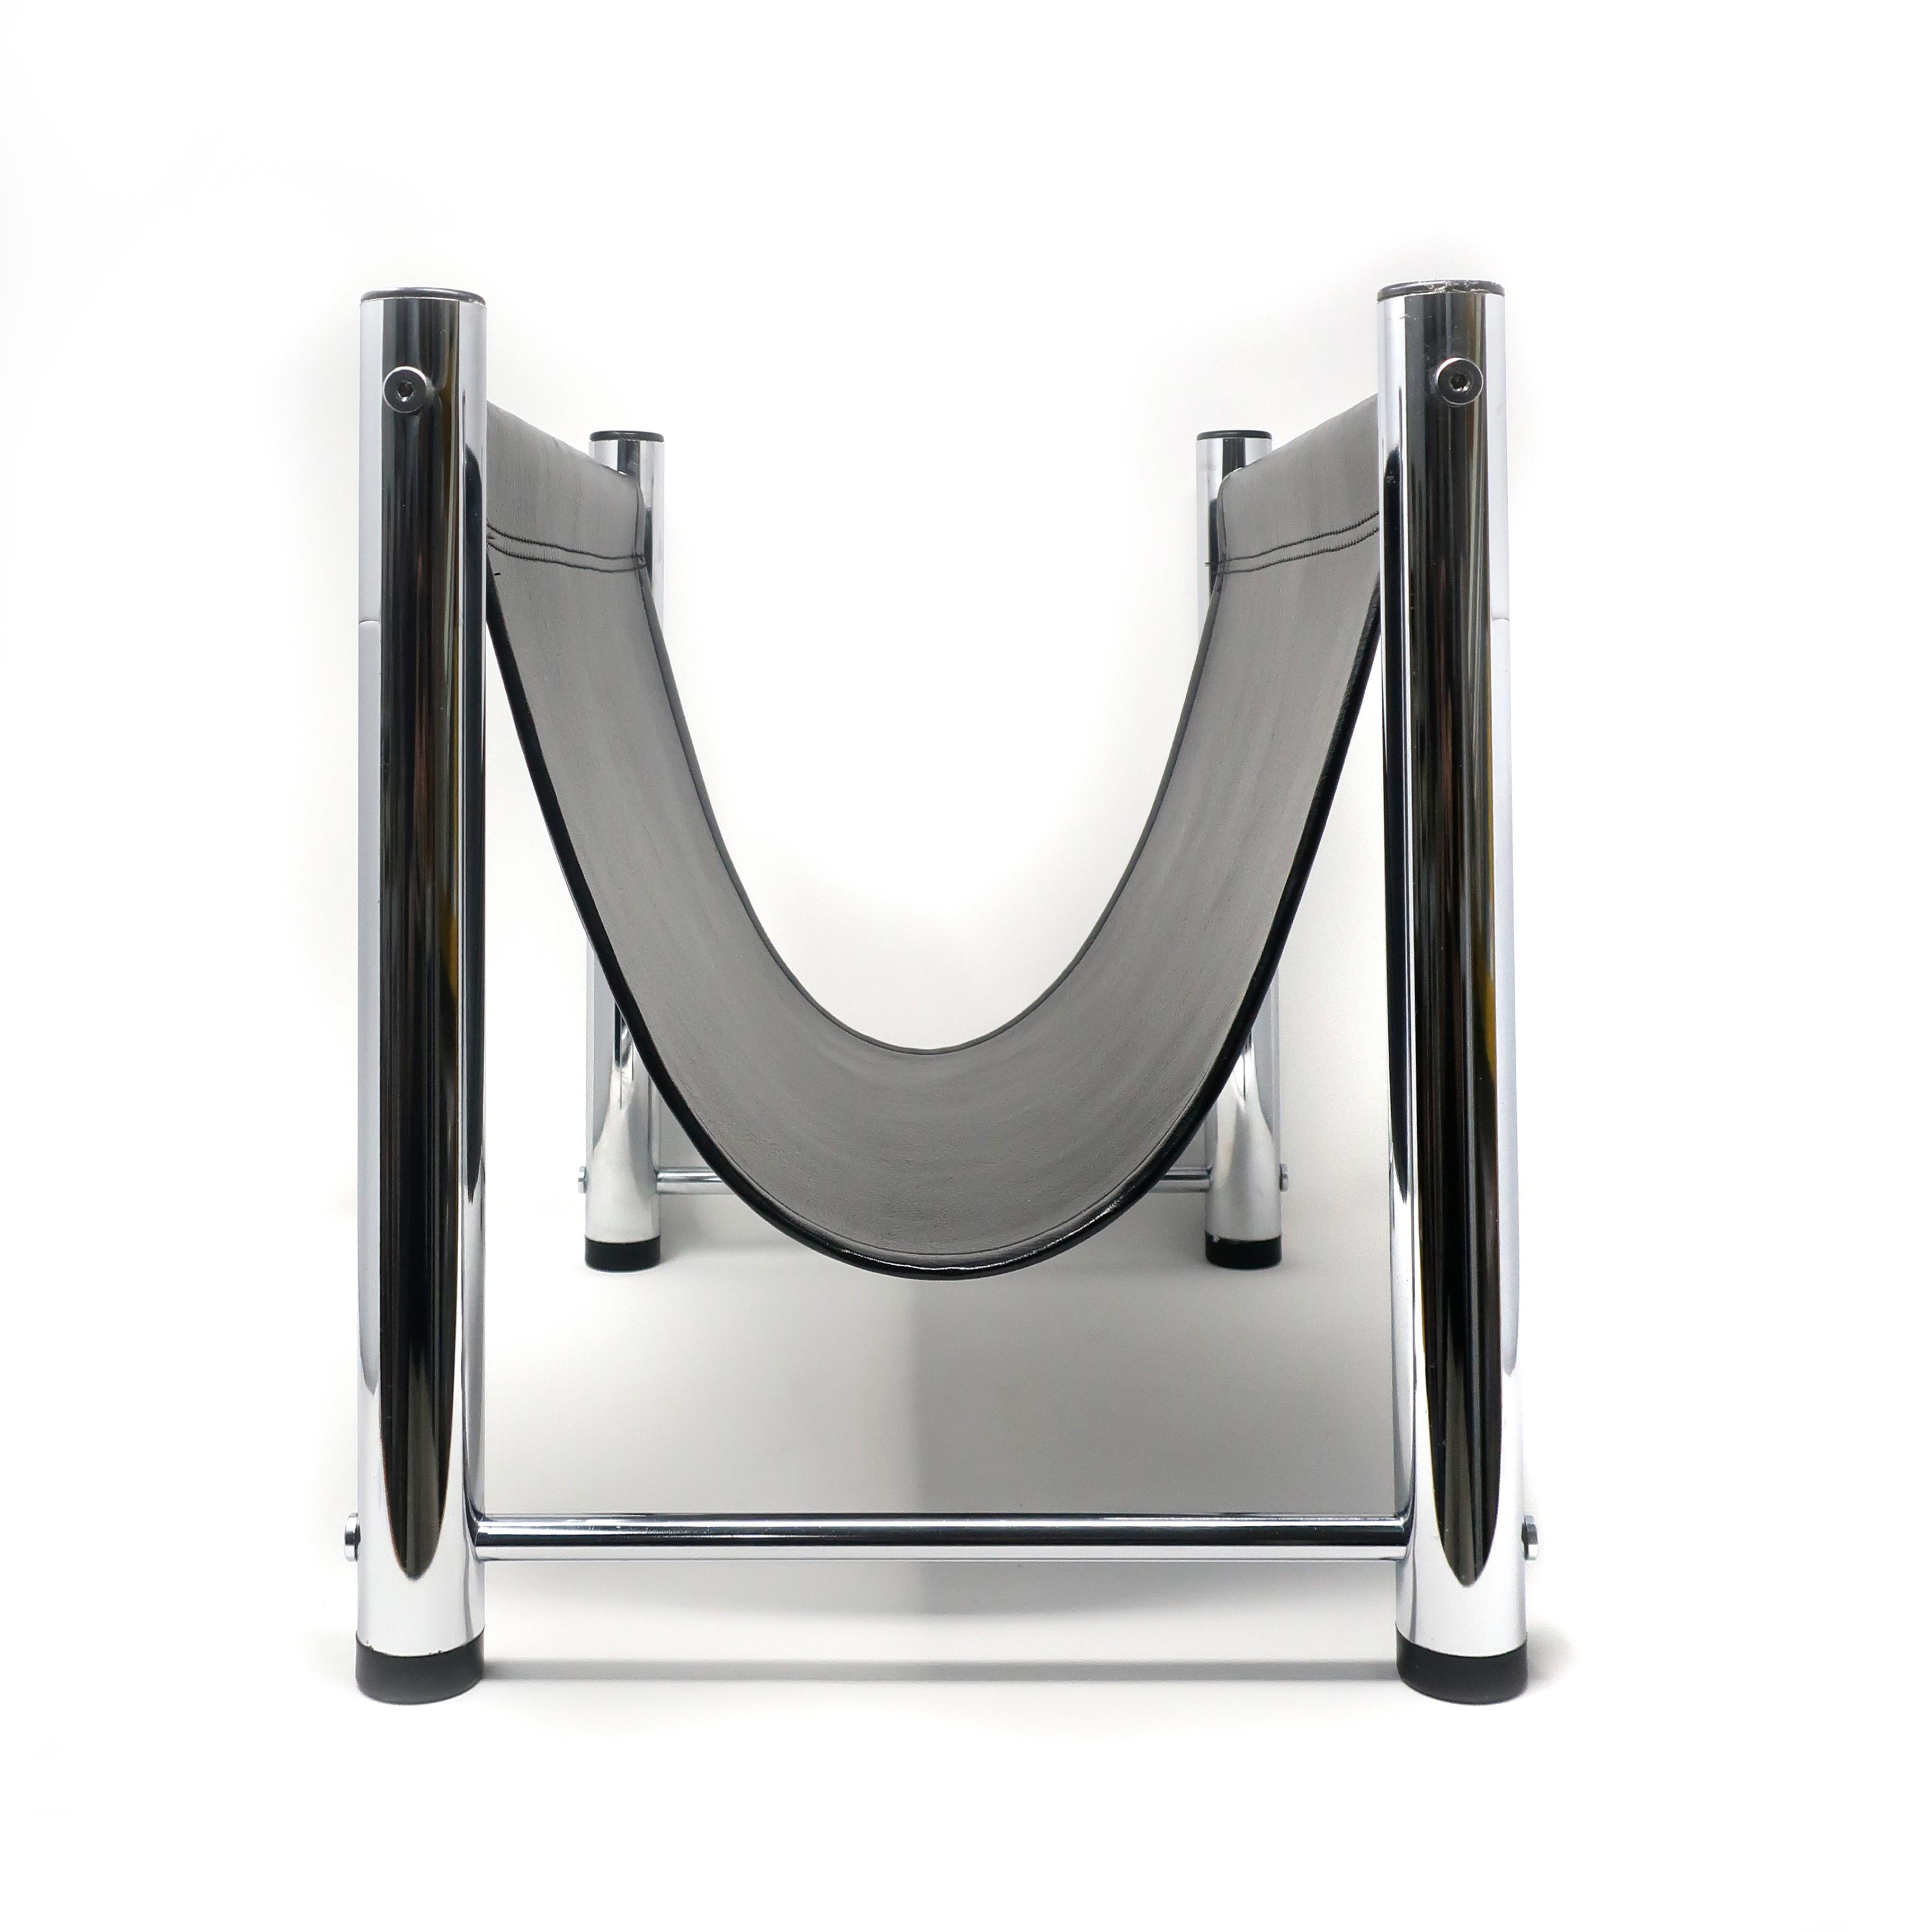 A Minimalist mod magazine rack designed with four tubular chrome legs and a black vinyl sling to hold magazine, books or firewood.

In very good vintage condition with scratches to one leg CAP.

Measures: 13